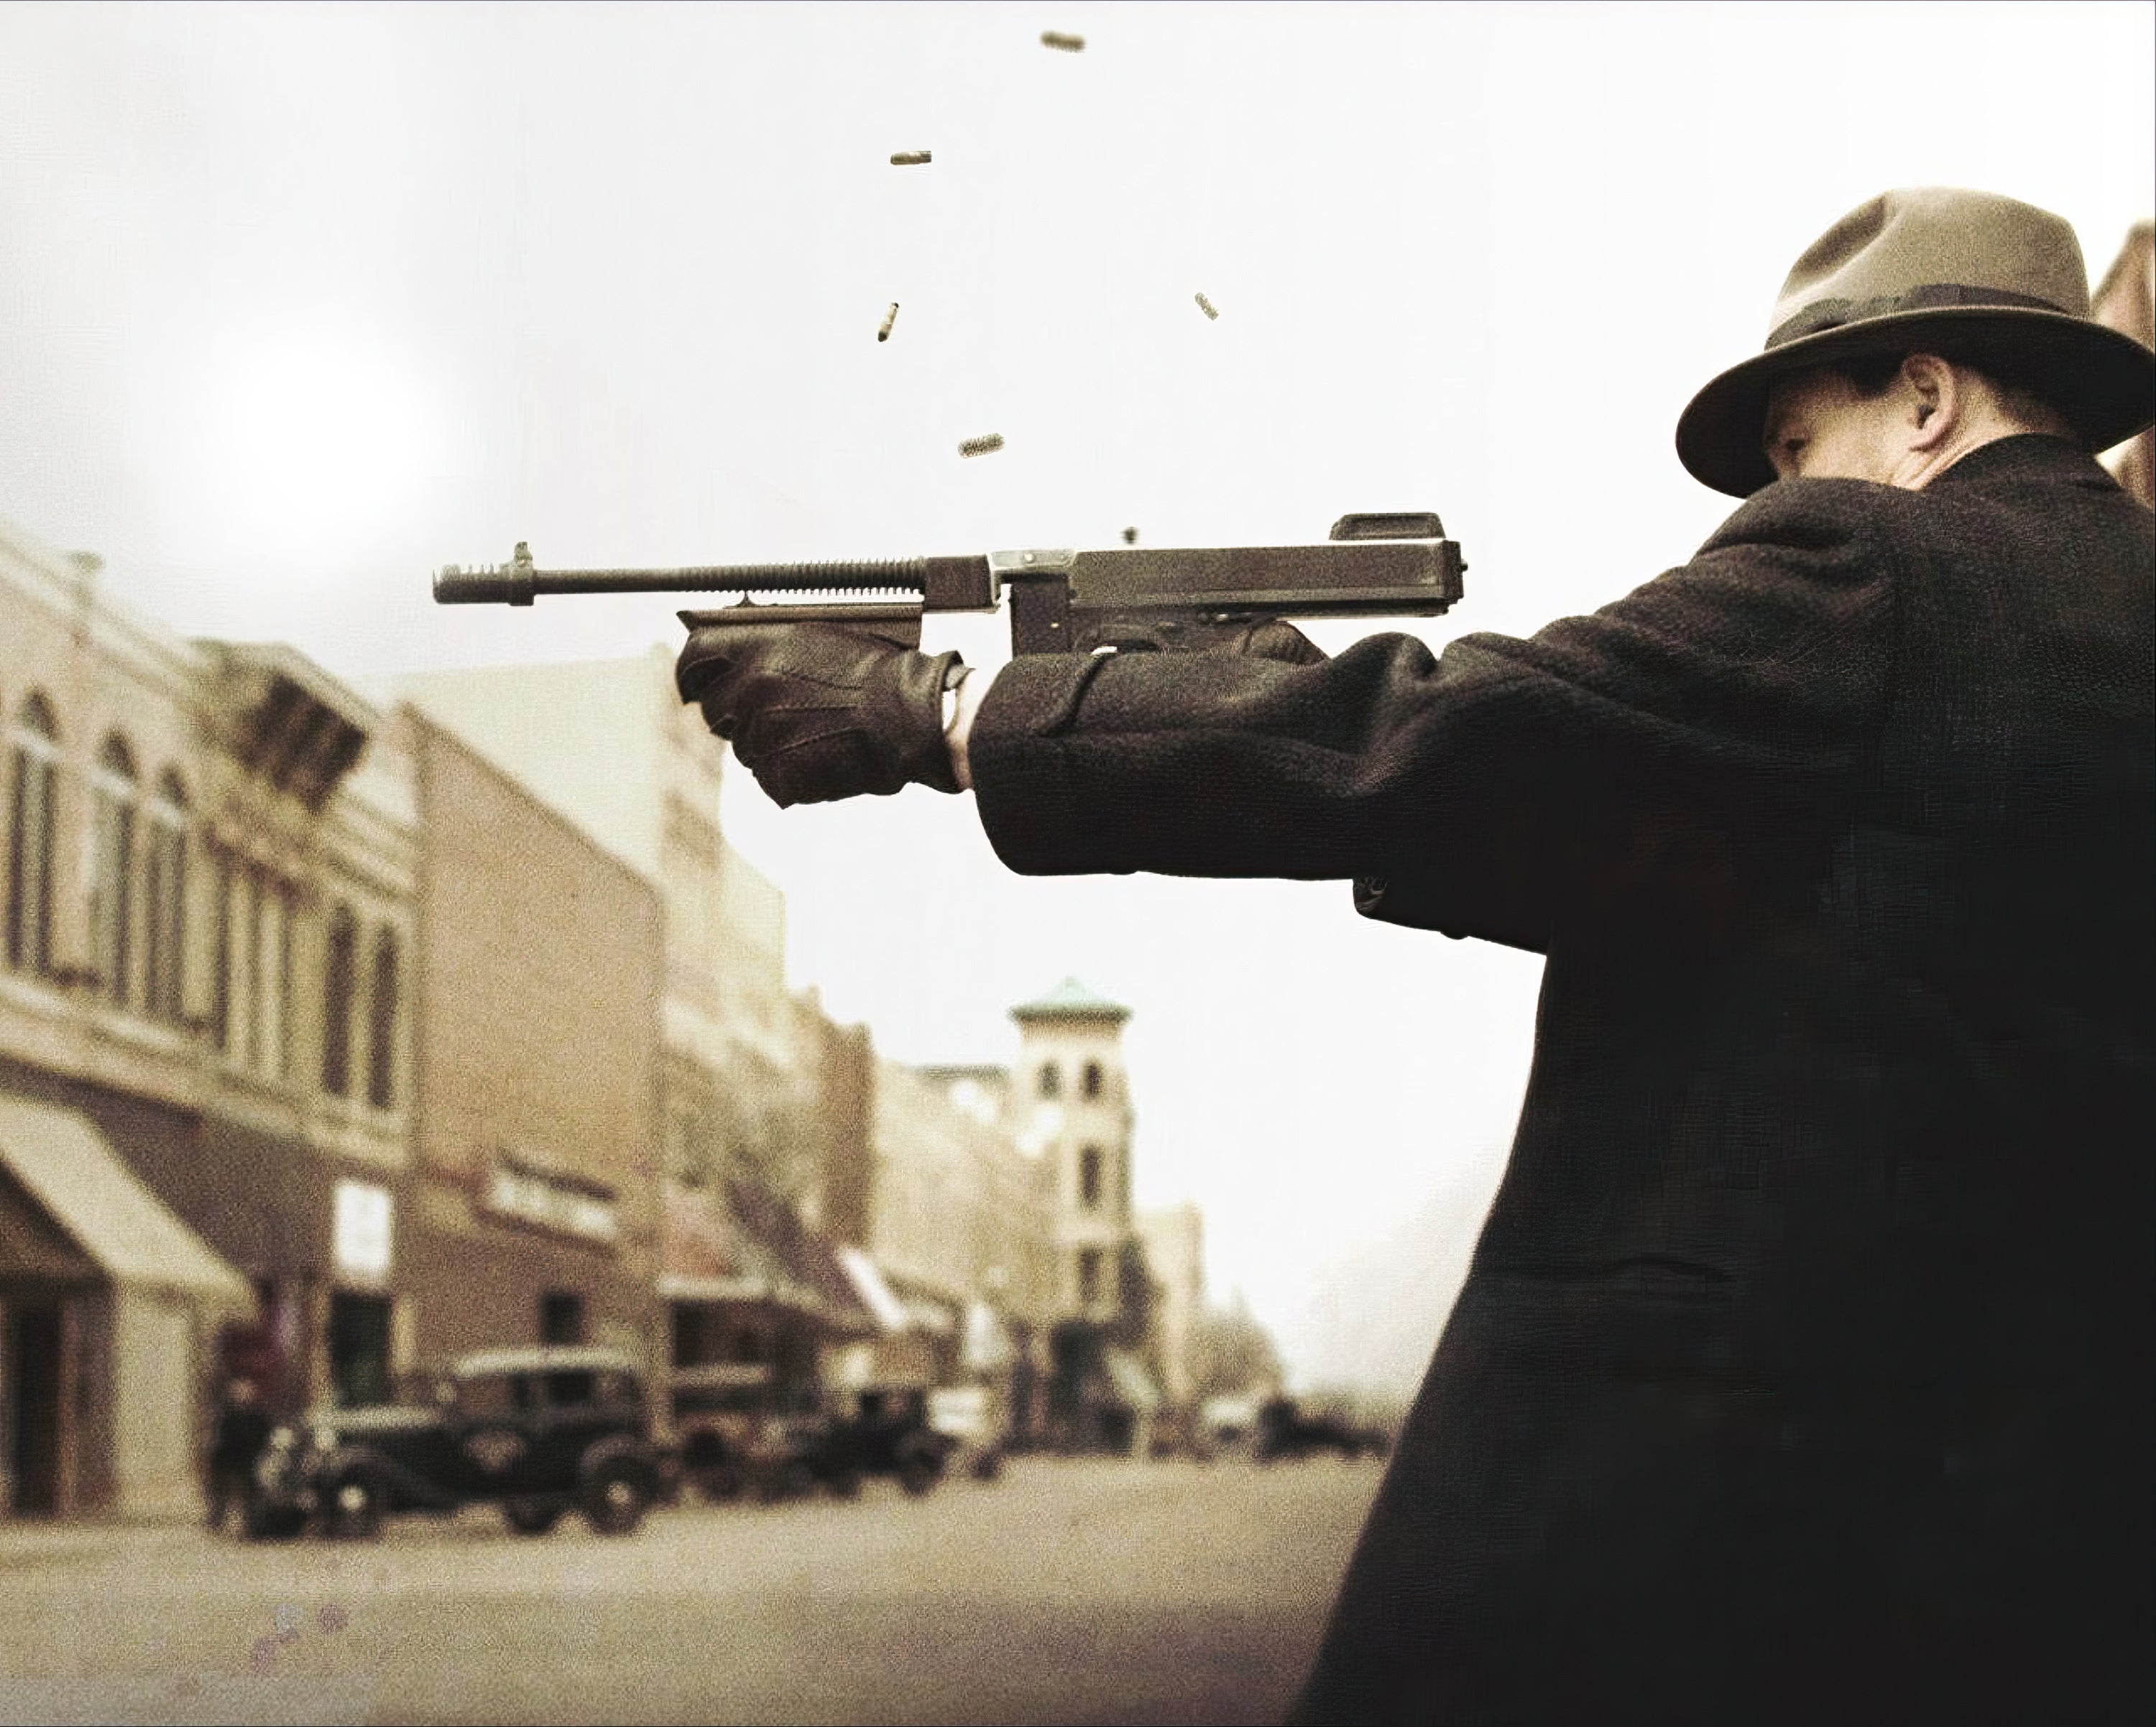 Public Enemies: America’s Greatest Crime Wave and the Birth of the FBI, 1933-1934 - Dillinger Image from movie